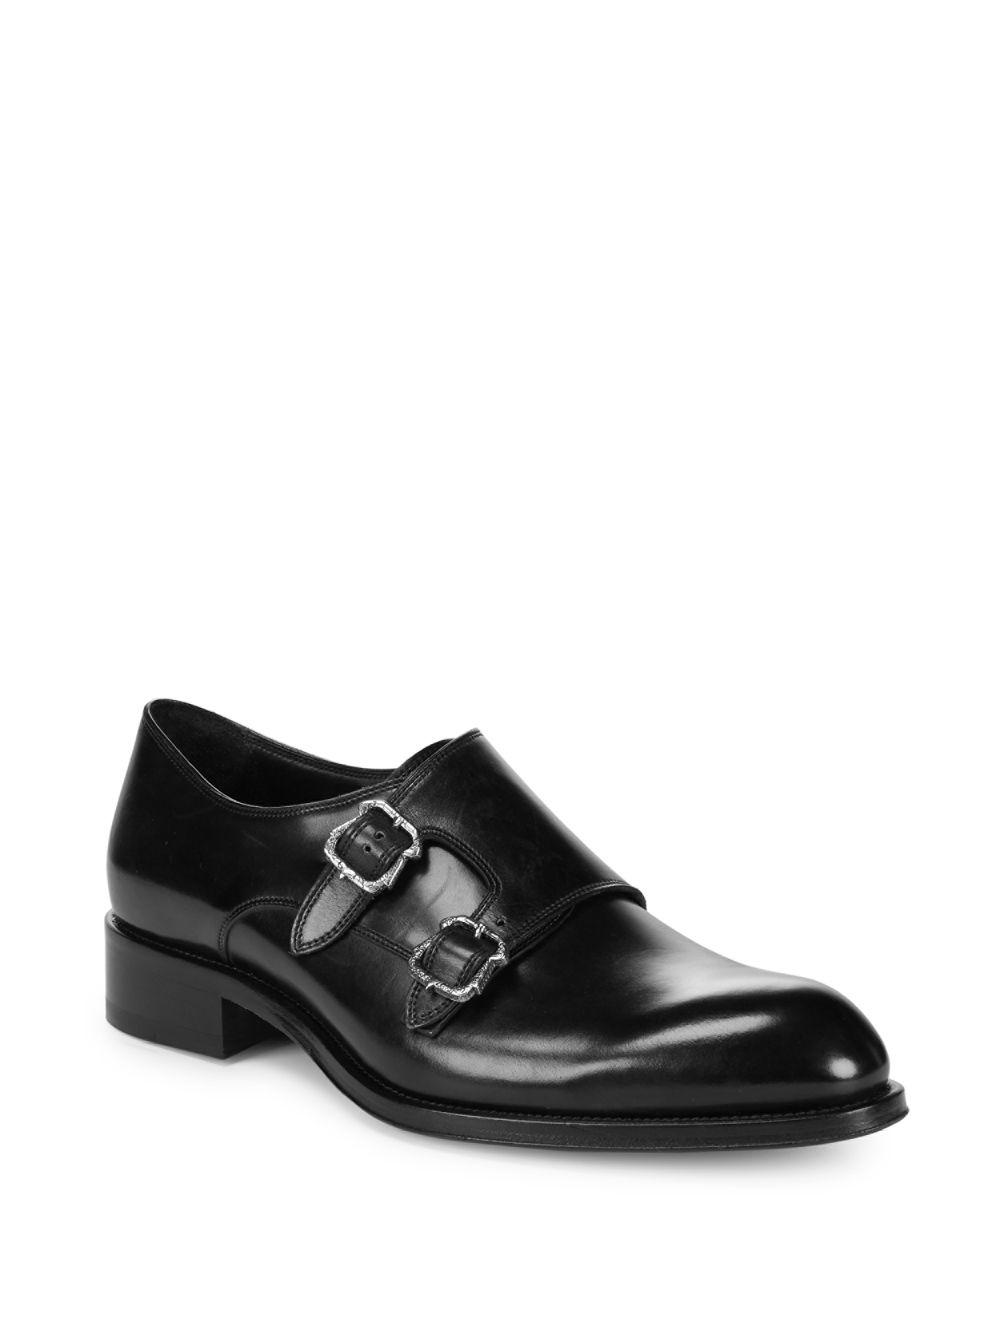 Brioni Double Monk Strap Leather Dress Shoes in Black for Men - Lyst